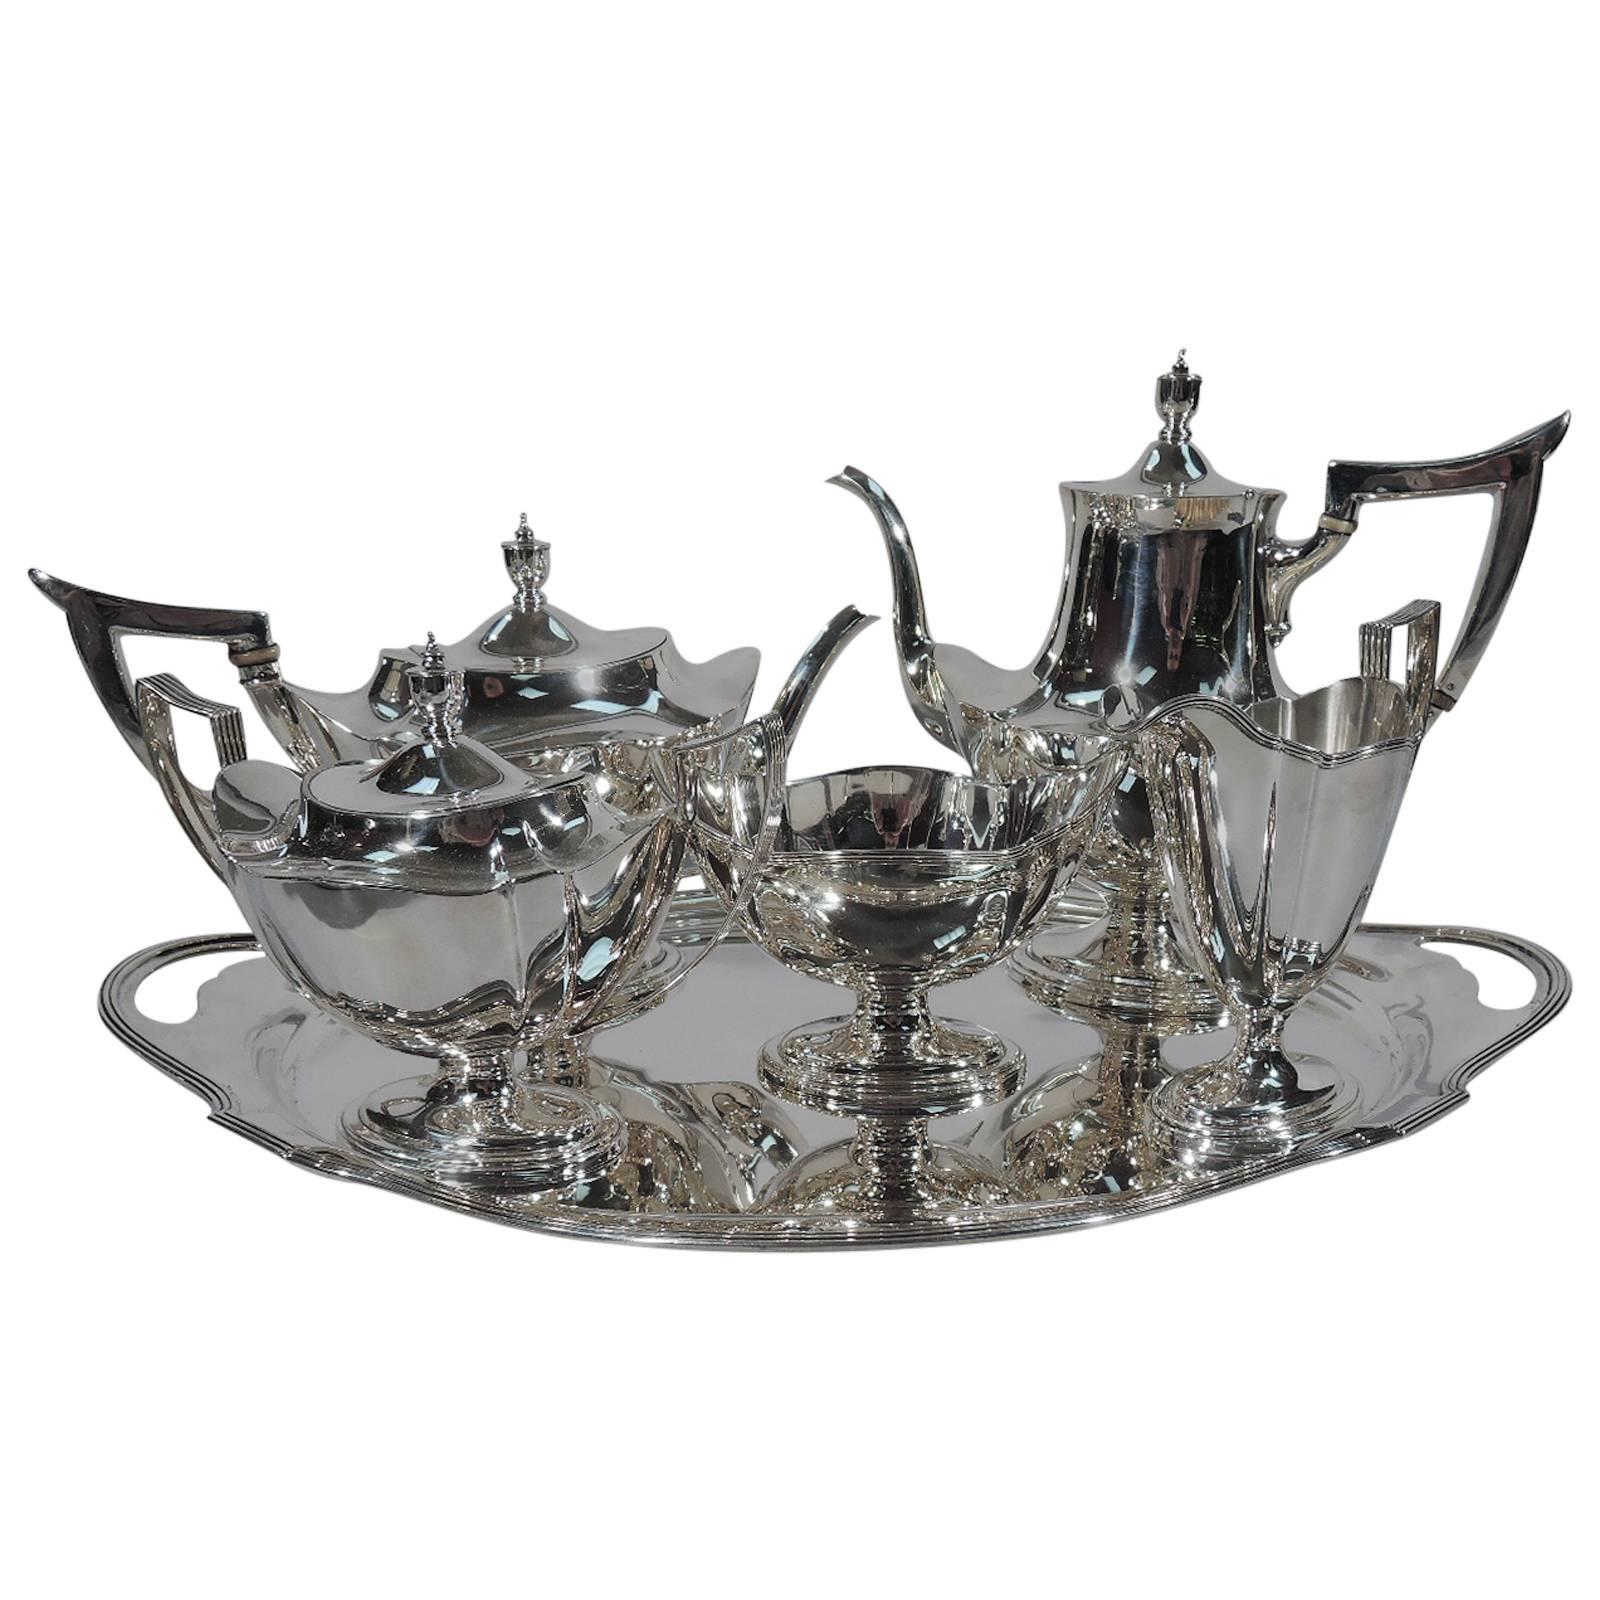 Gorham Plymouth Sterling Silver Tea and Coffee Set on Tray